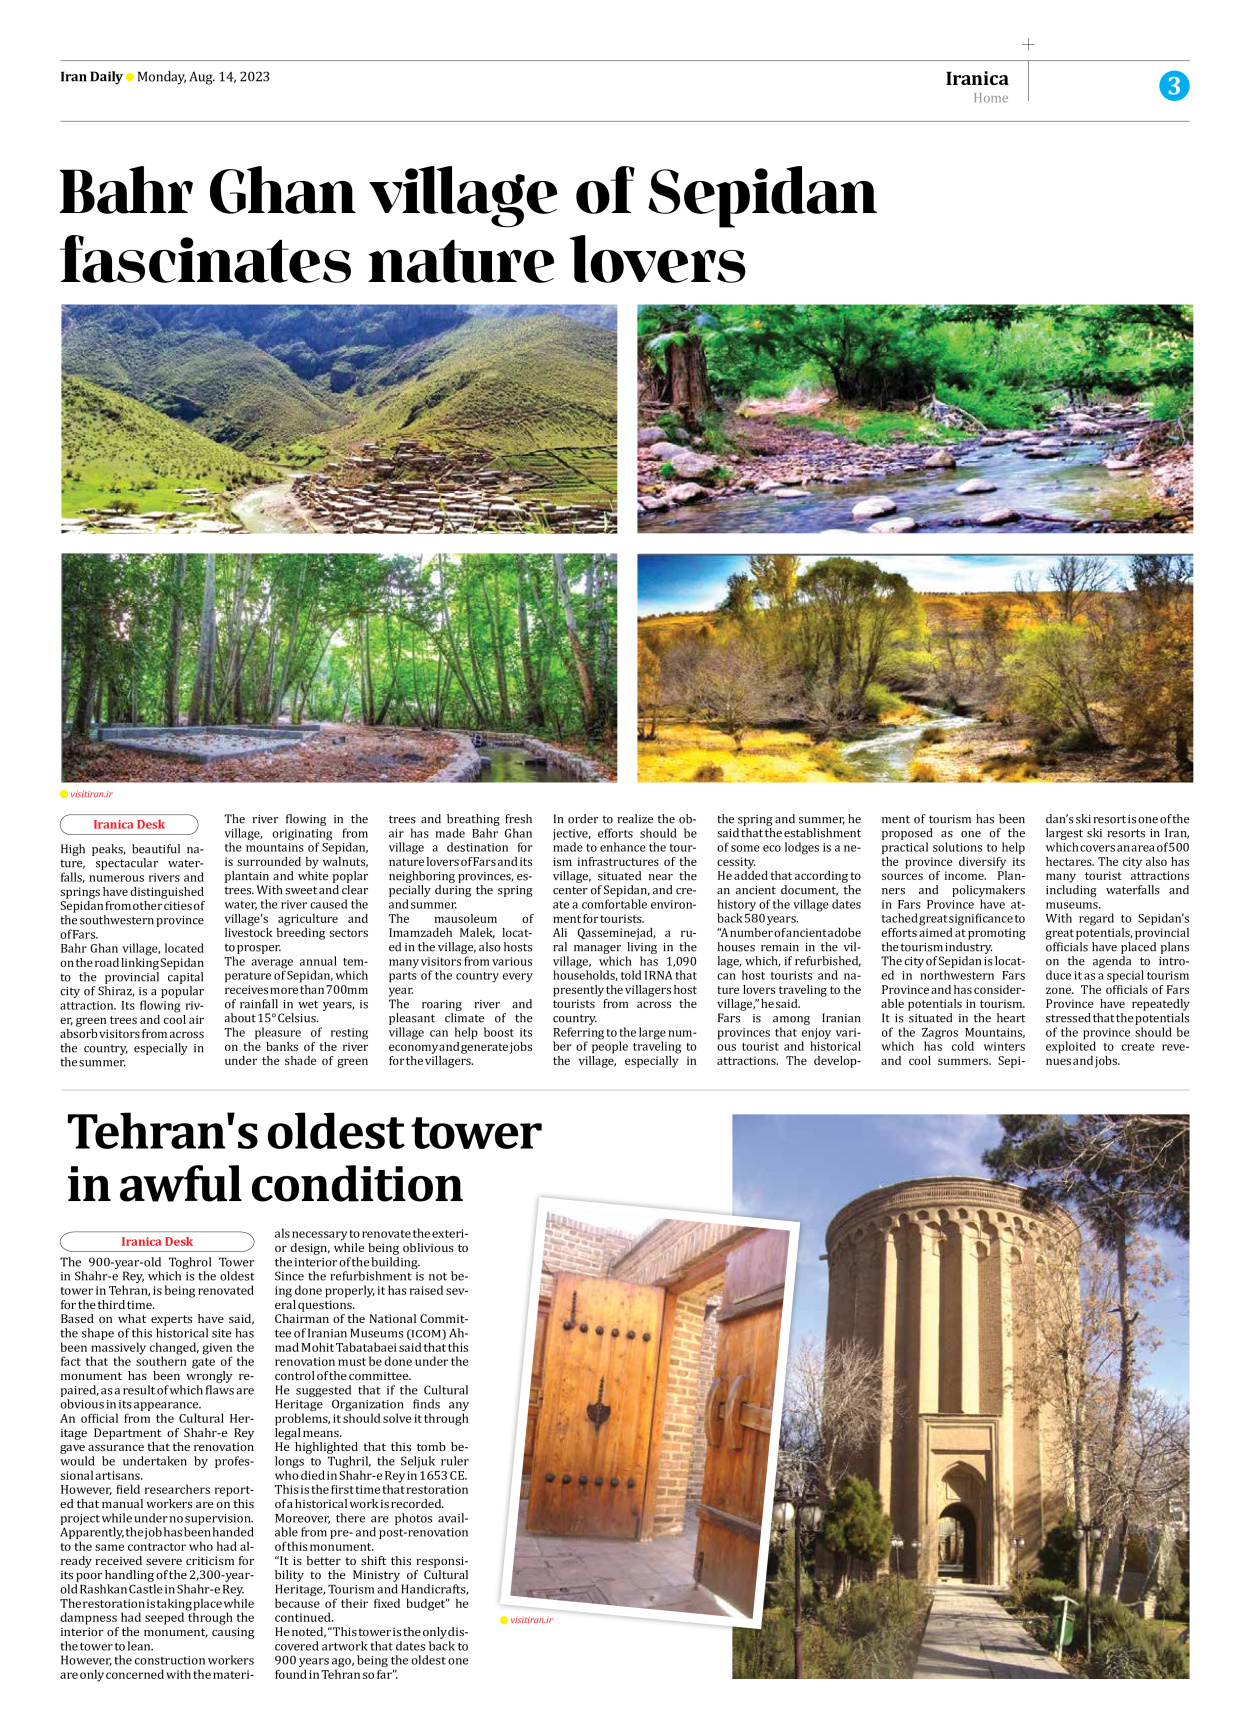 Iran Daily - Number Seven Thousand Three Hundred and Sixty Two - 14 August 2023 - Page 3